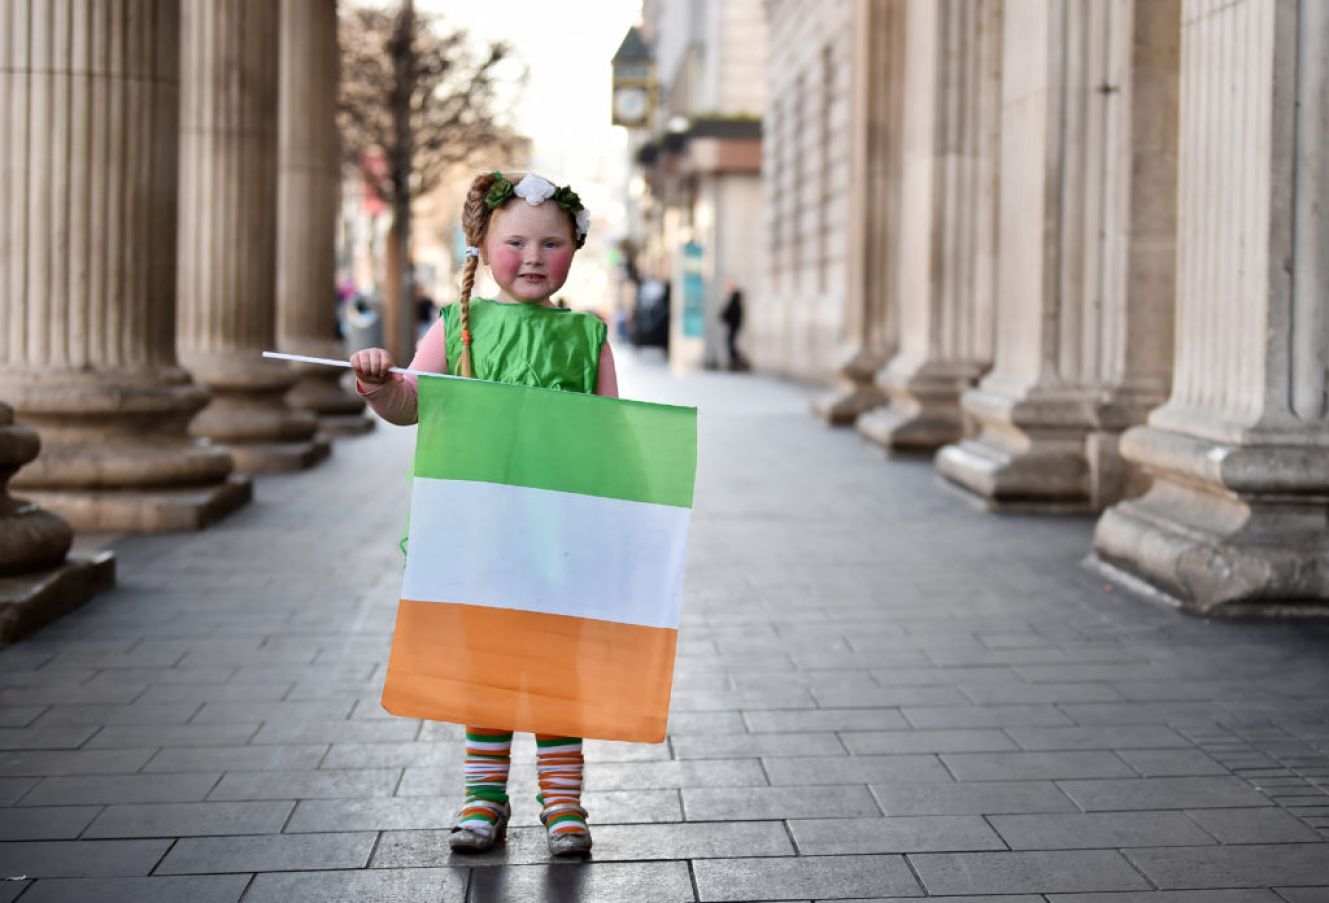 Willie O’brien (5) Outside The General Post Office On St Patrick's Day. Photo: Charles Mcquillan/Getty